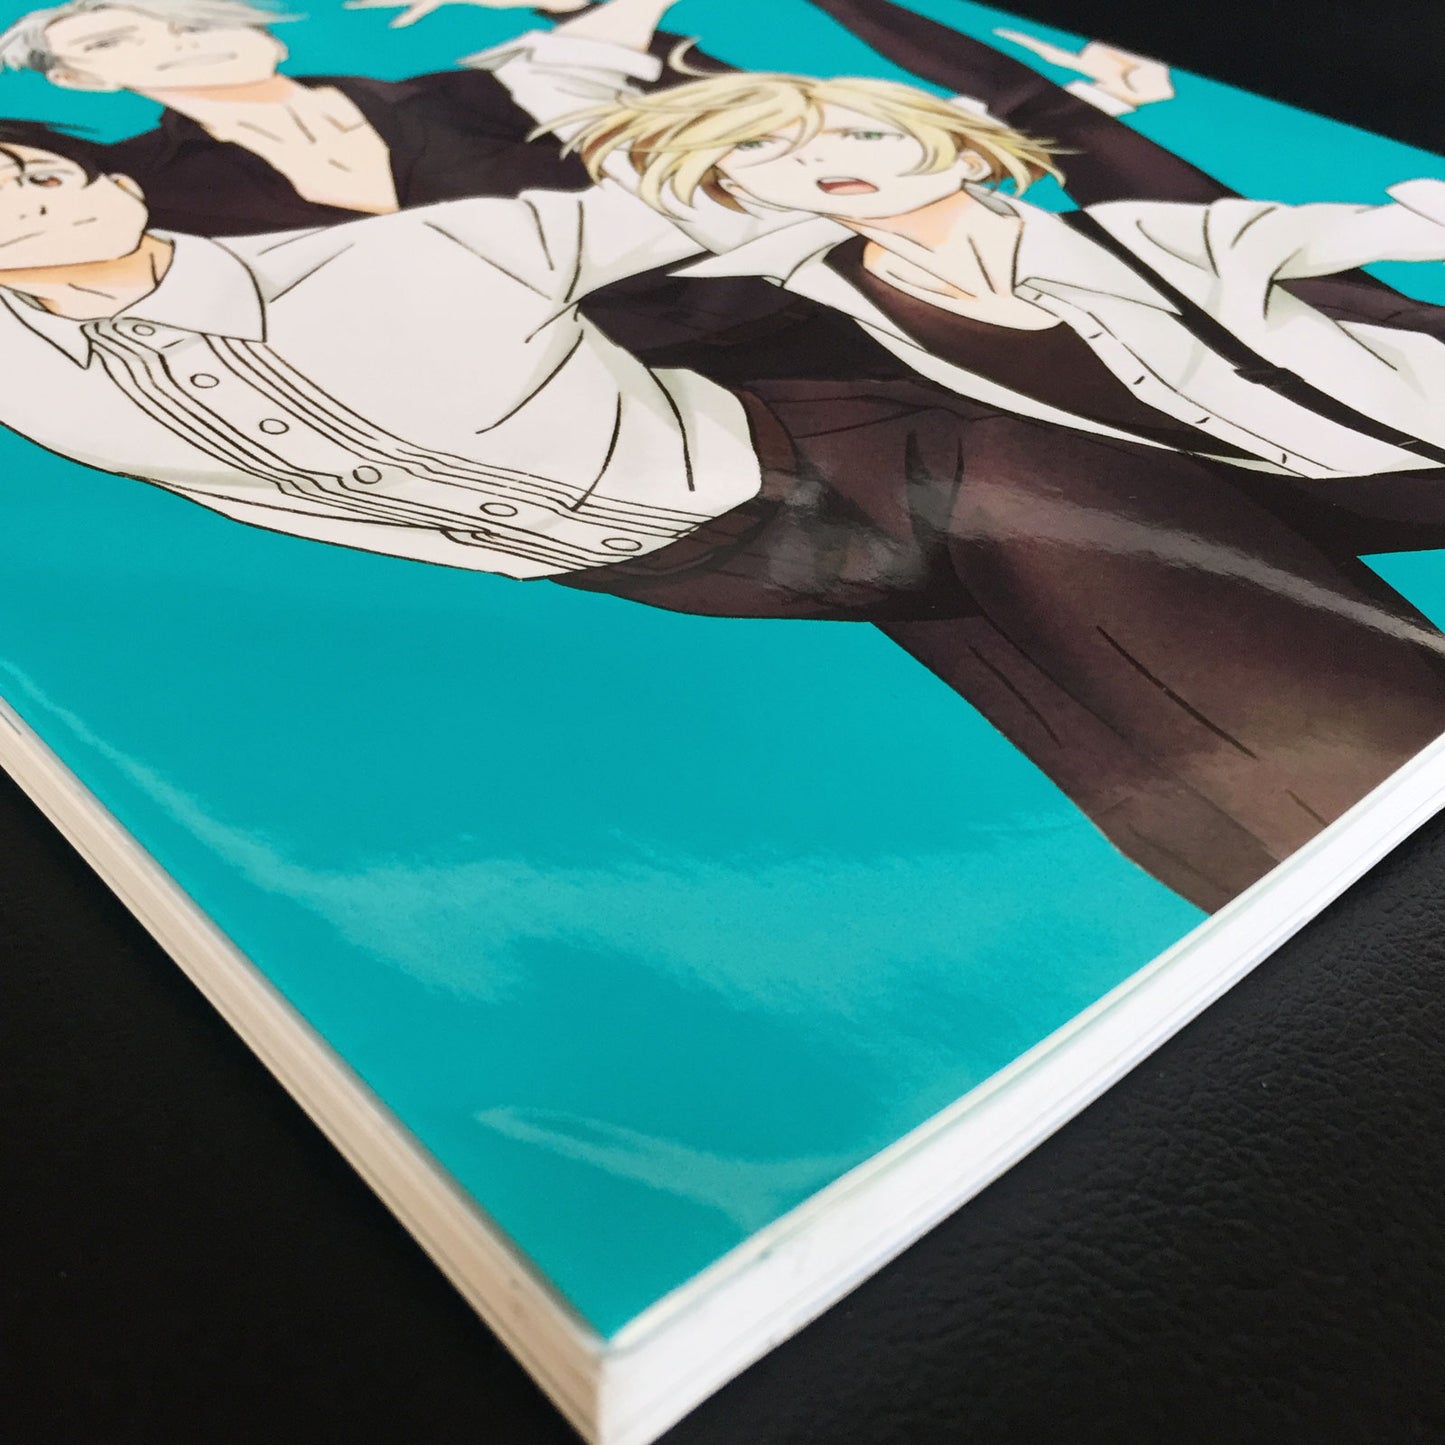 YURI ON ICE Official Guide Book 'Yuri on Life'